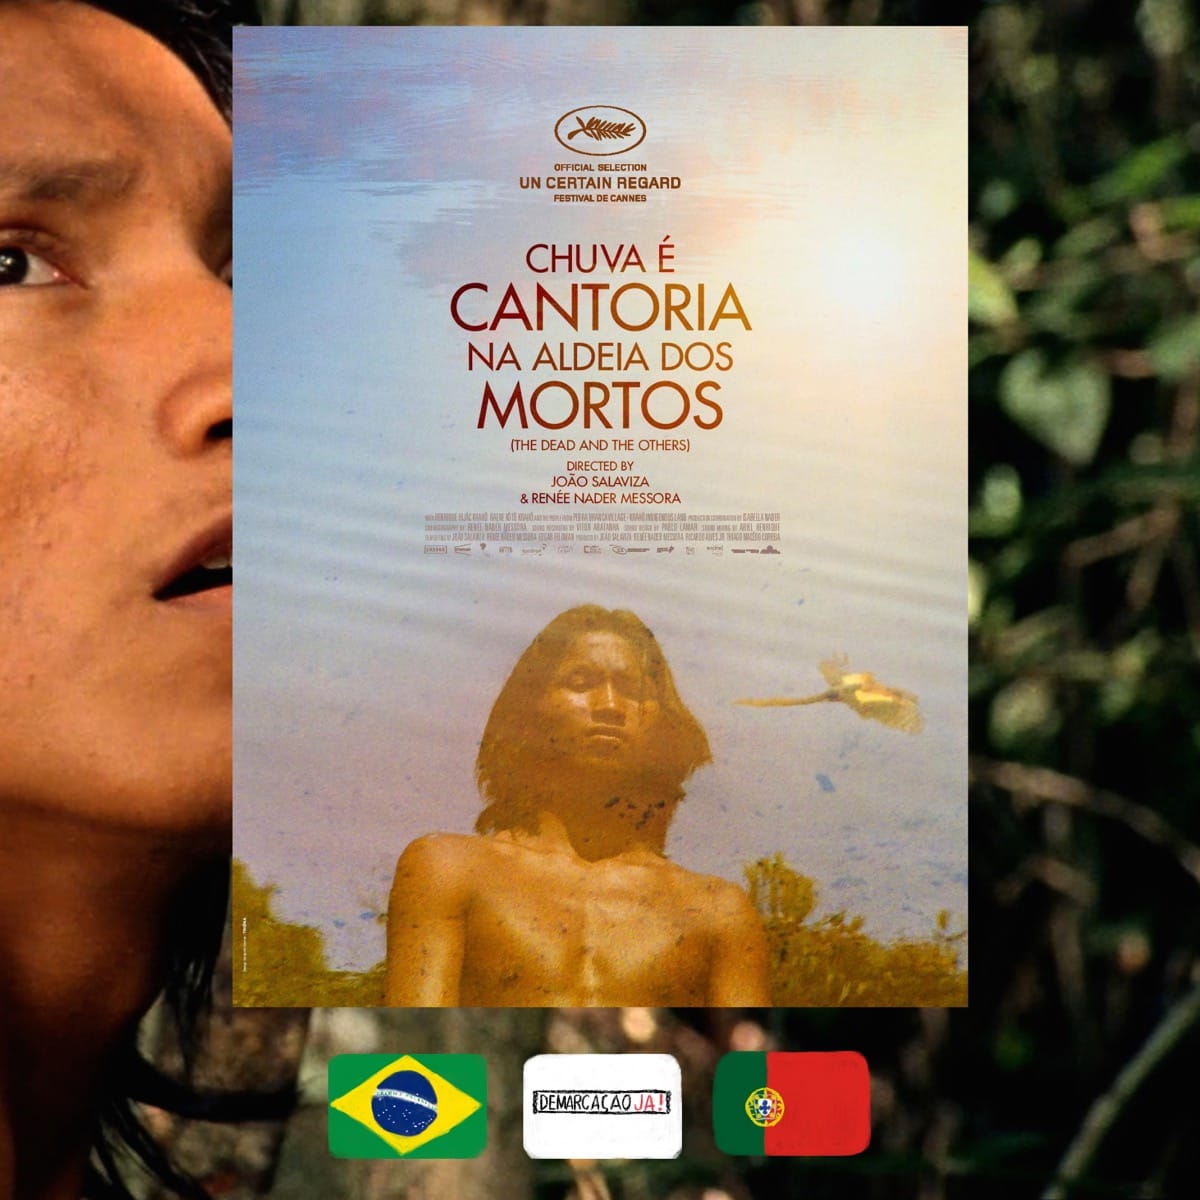 The Dead and the Others, João Salaviza, Renée Nader Messora, movie review